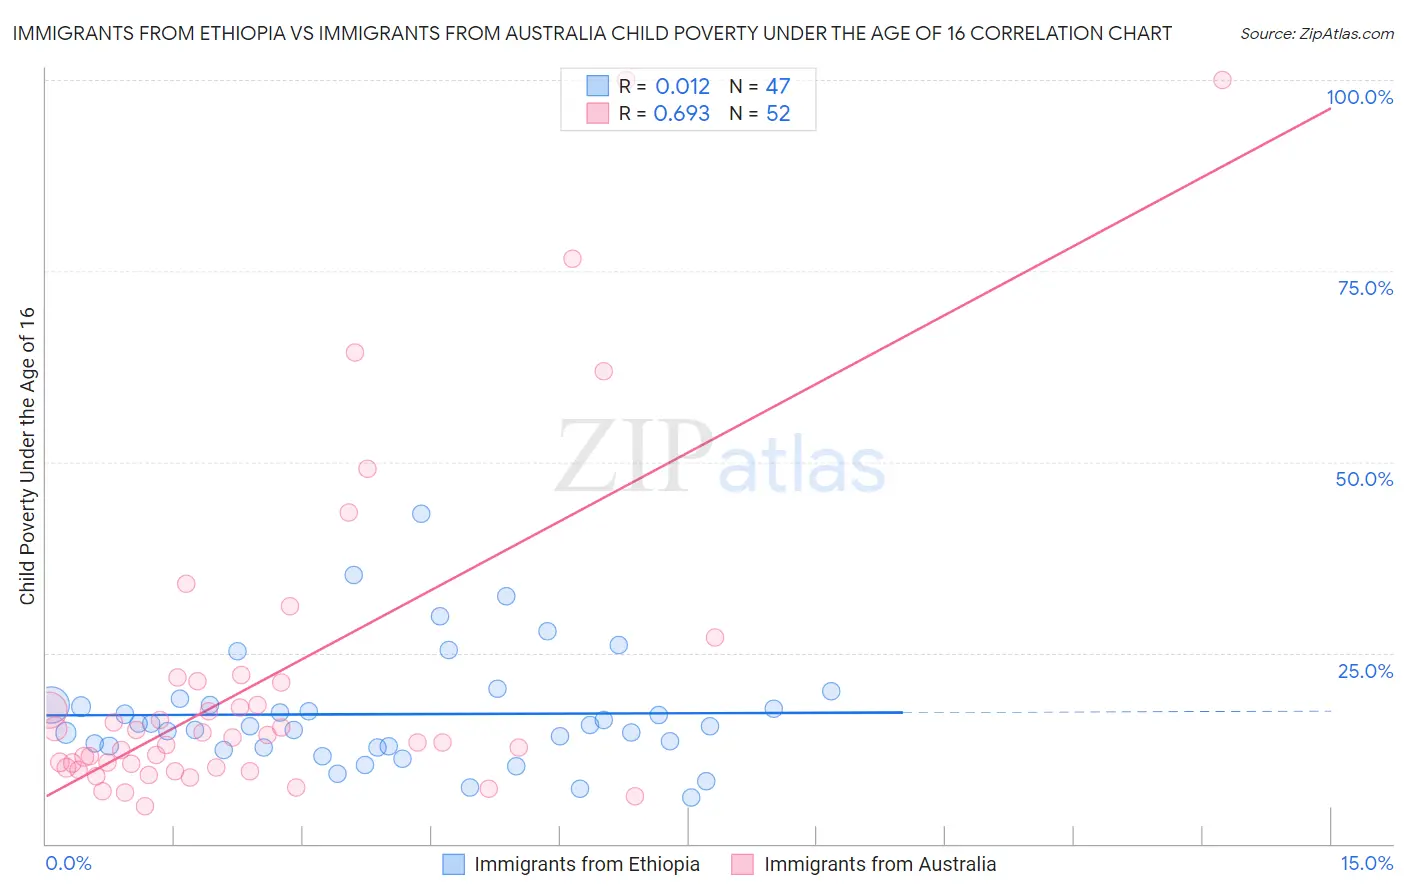 Immigrants from Ethiopia vs Immigrants from Australia Child Poverty Under the Age of 16